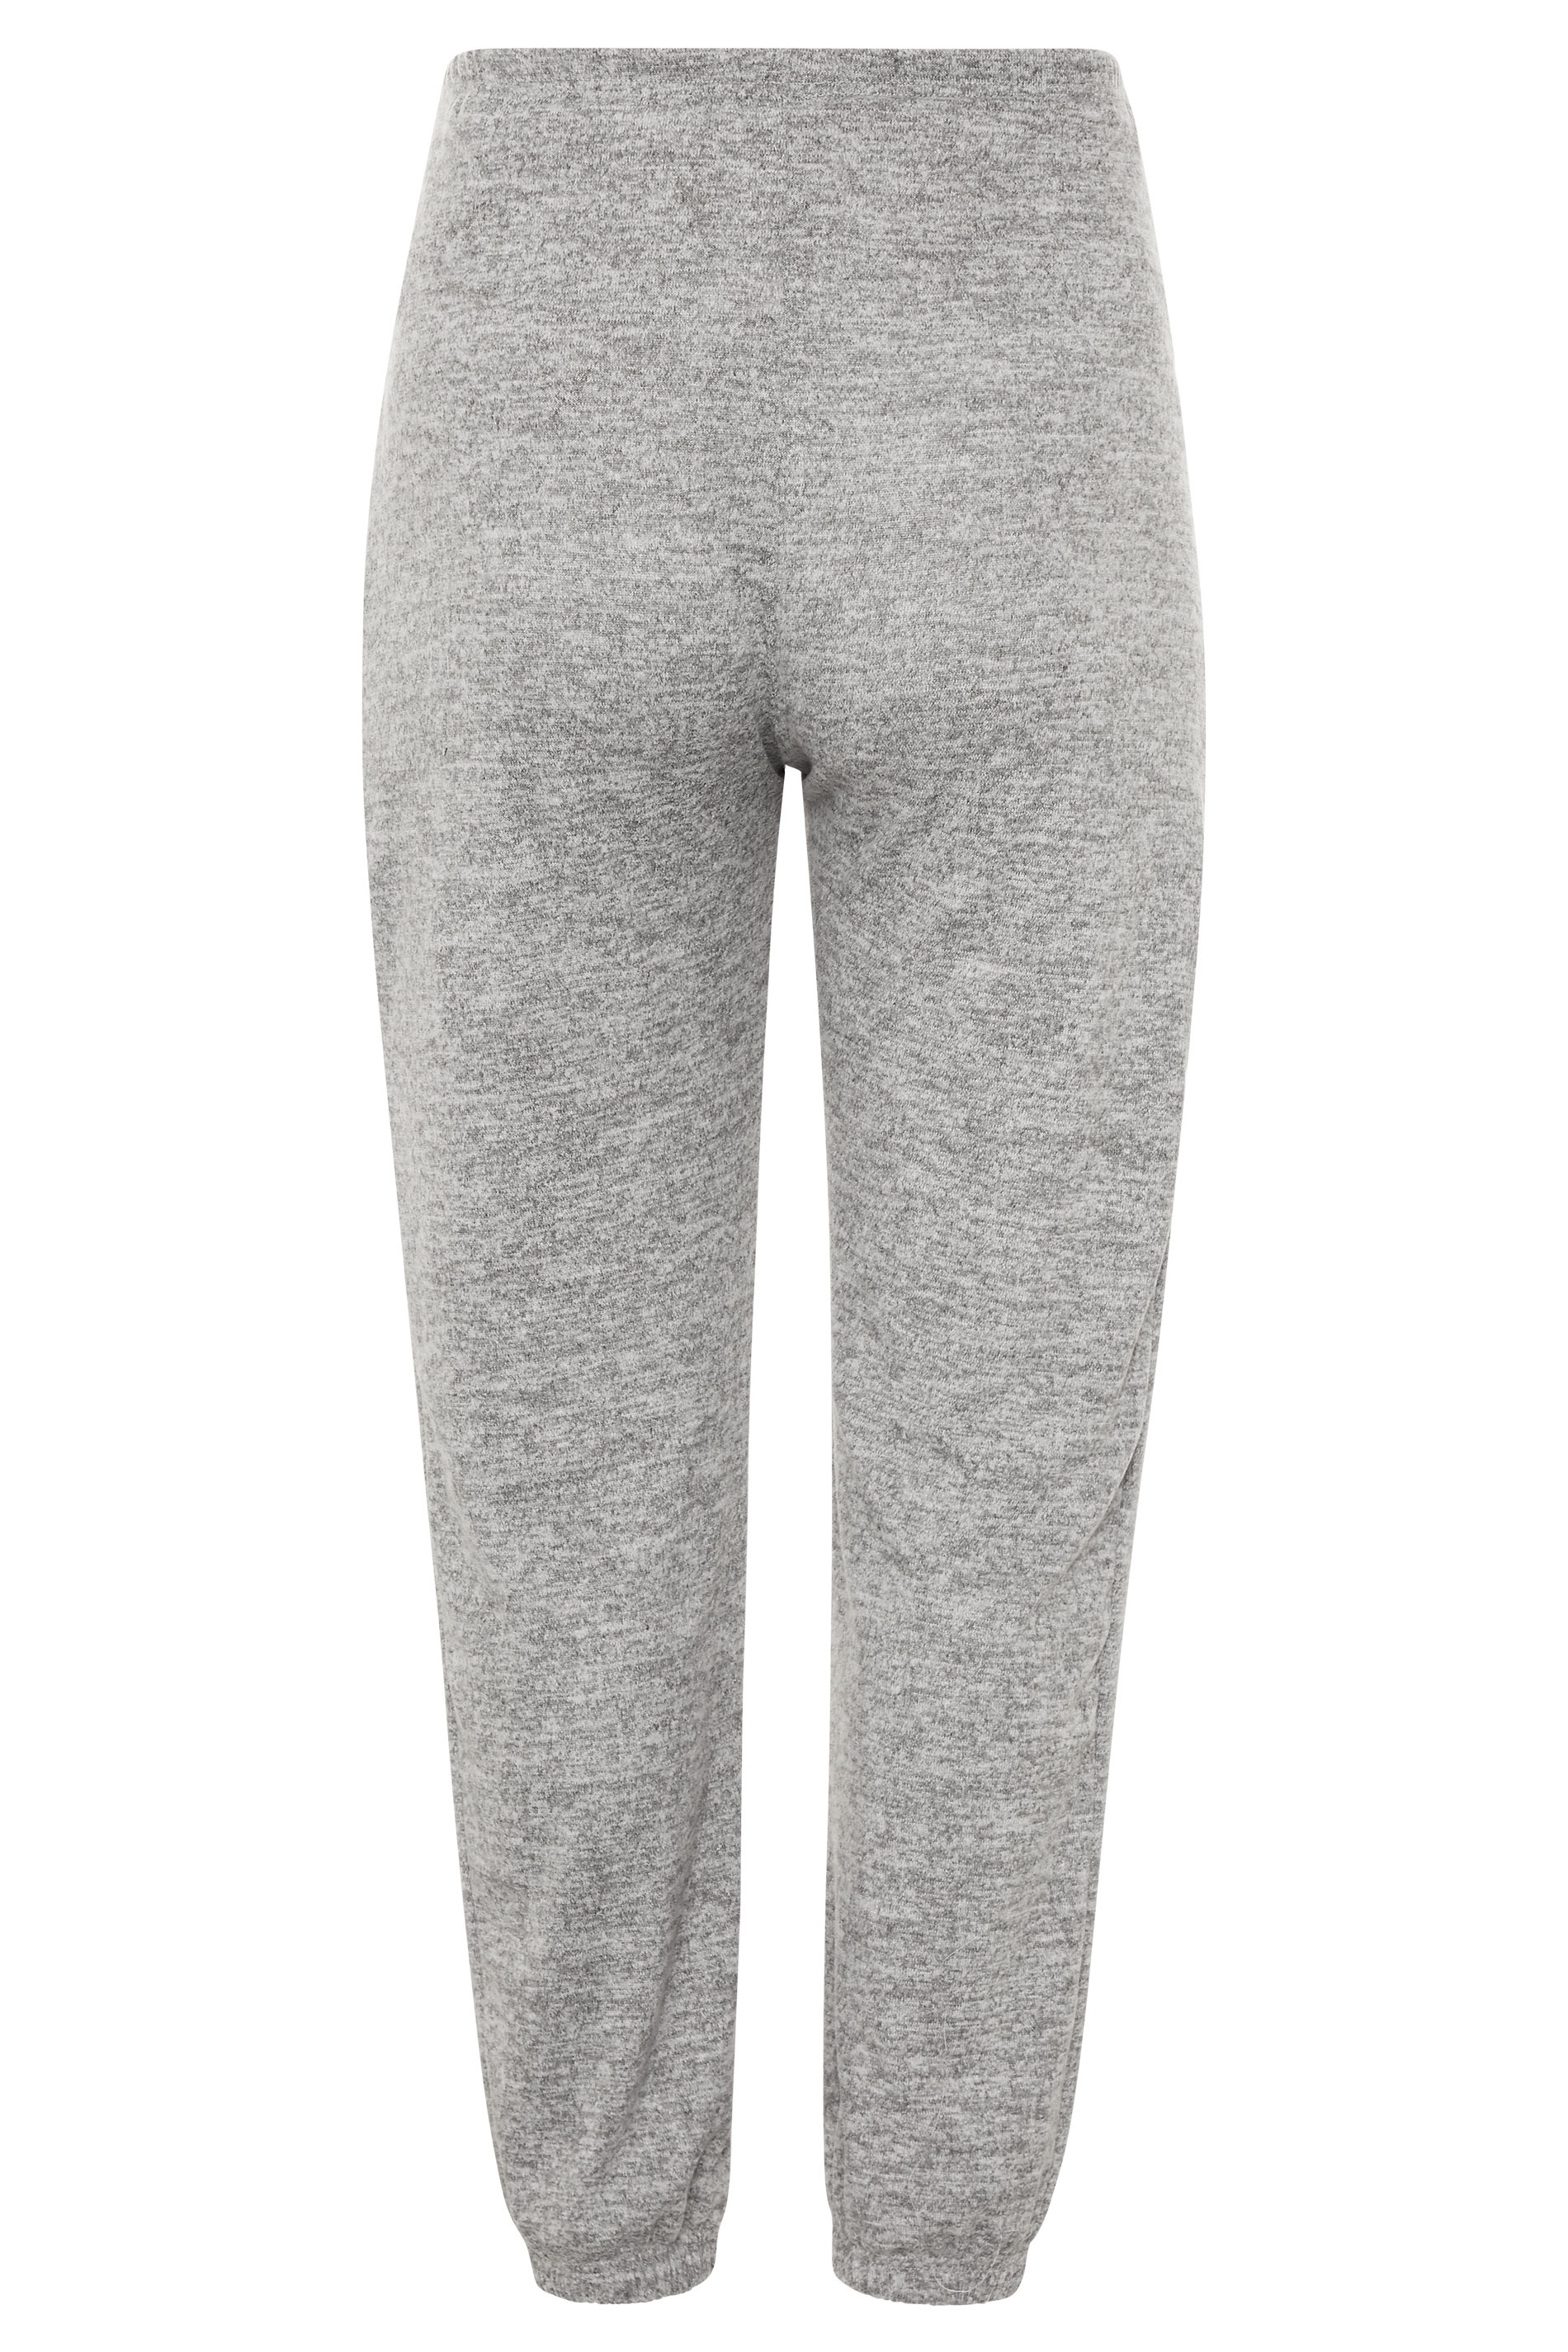 BUMP IT UP MATERNITY Grey Marl Brushed Lounge Pants | Yours Clothing